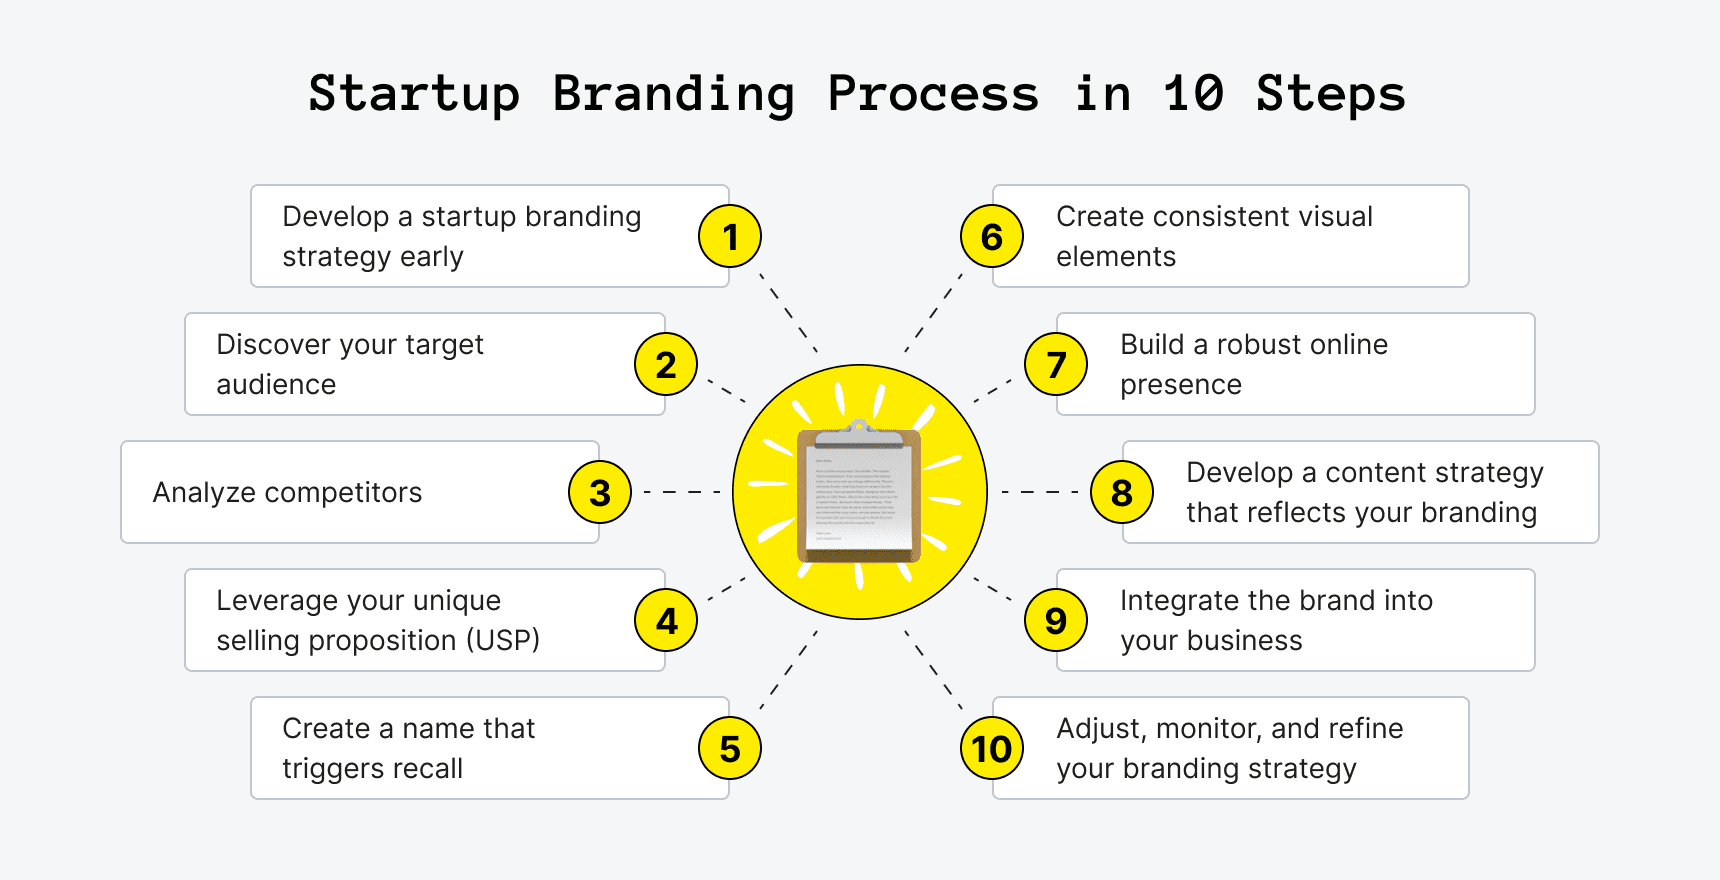 Startups branding process in 10 steps explained with the help of a diagram